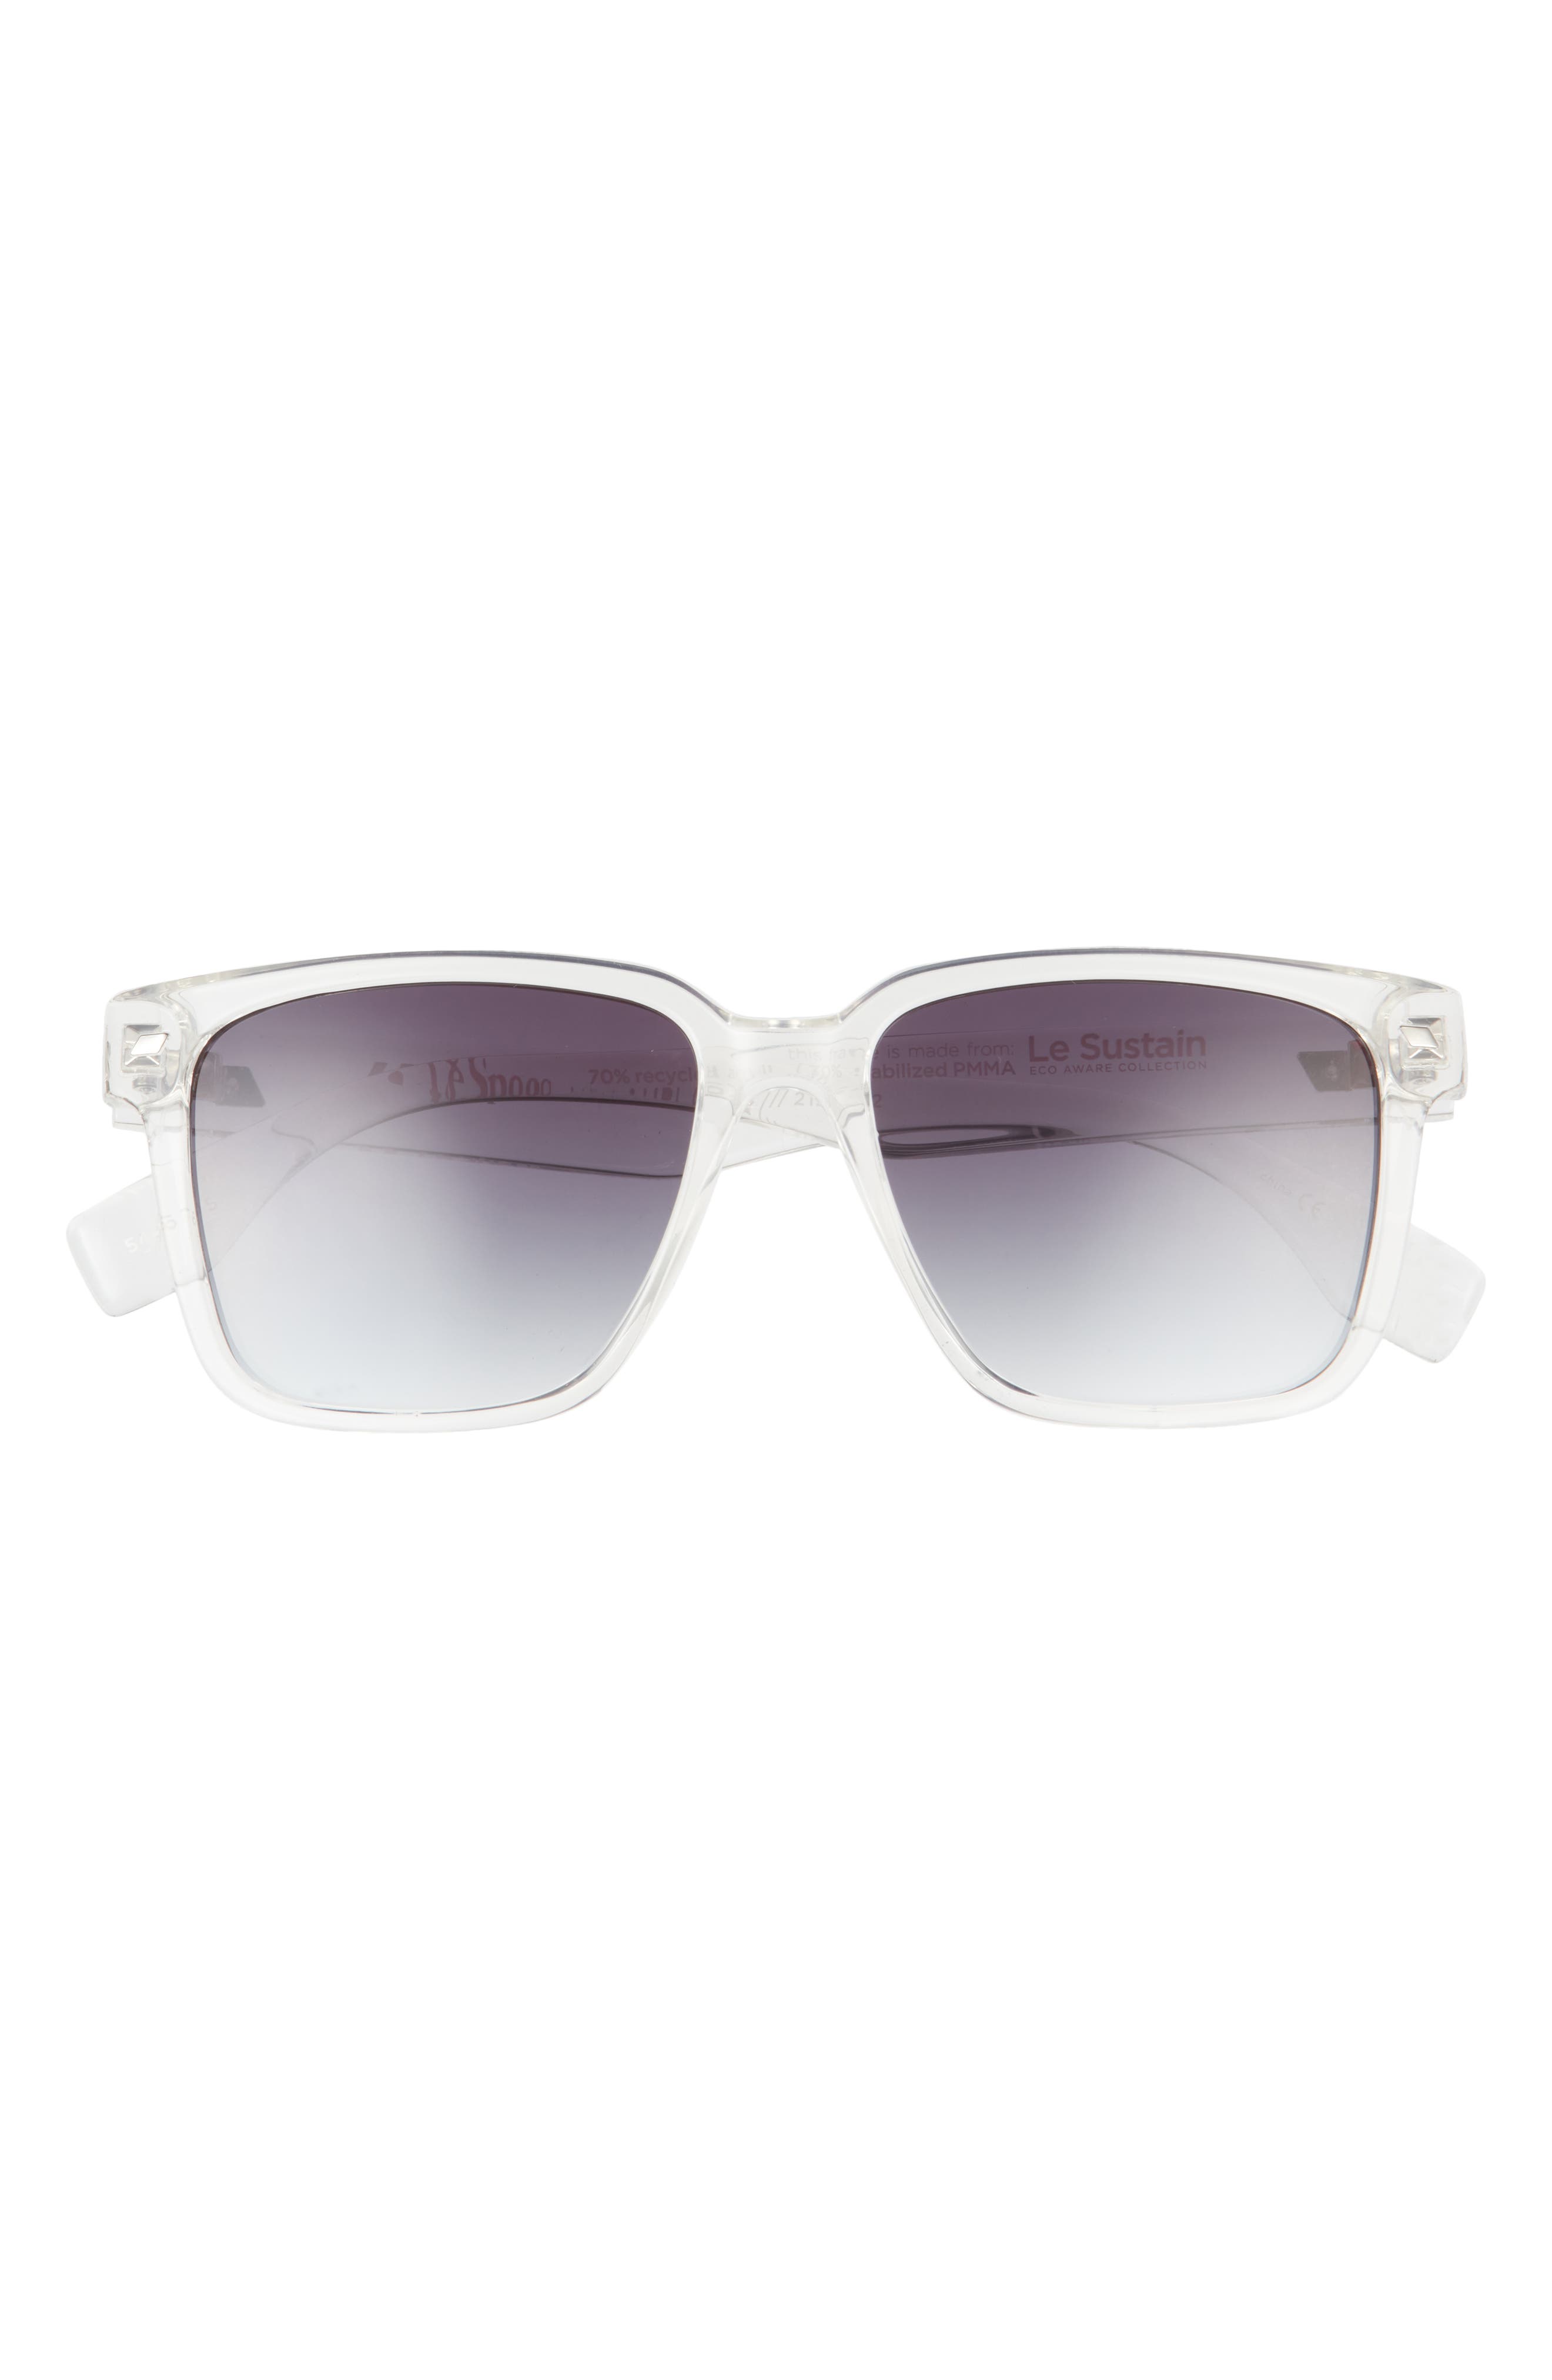 Le Specs Bomplastic 54mm Square Sunglasses in Pewter /Cool Smoke Grad at Nordstrom